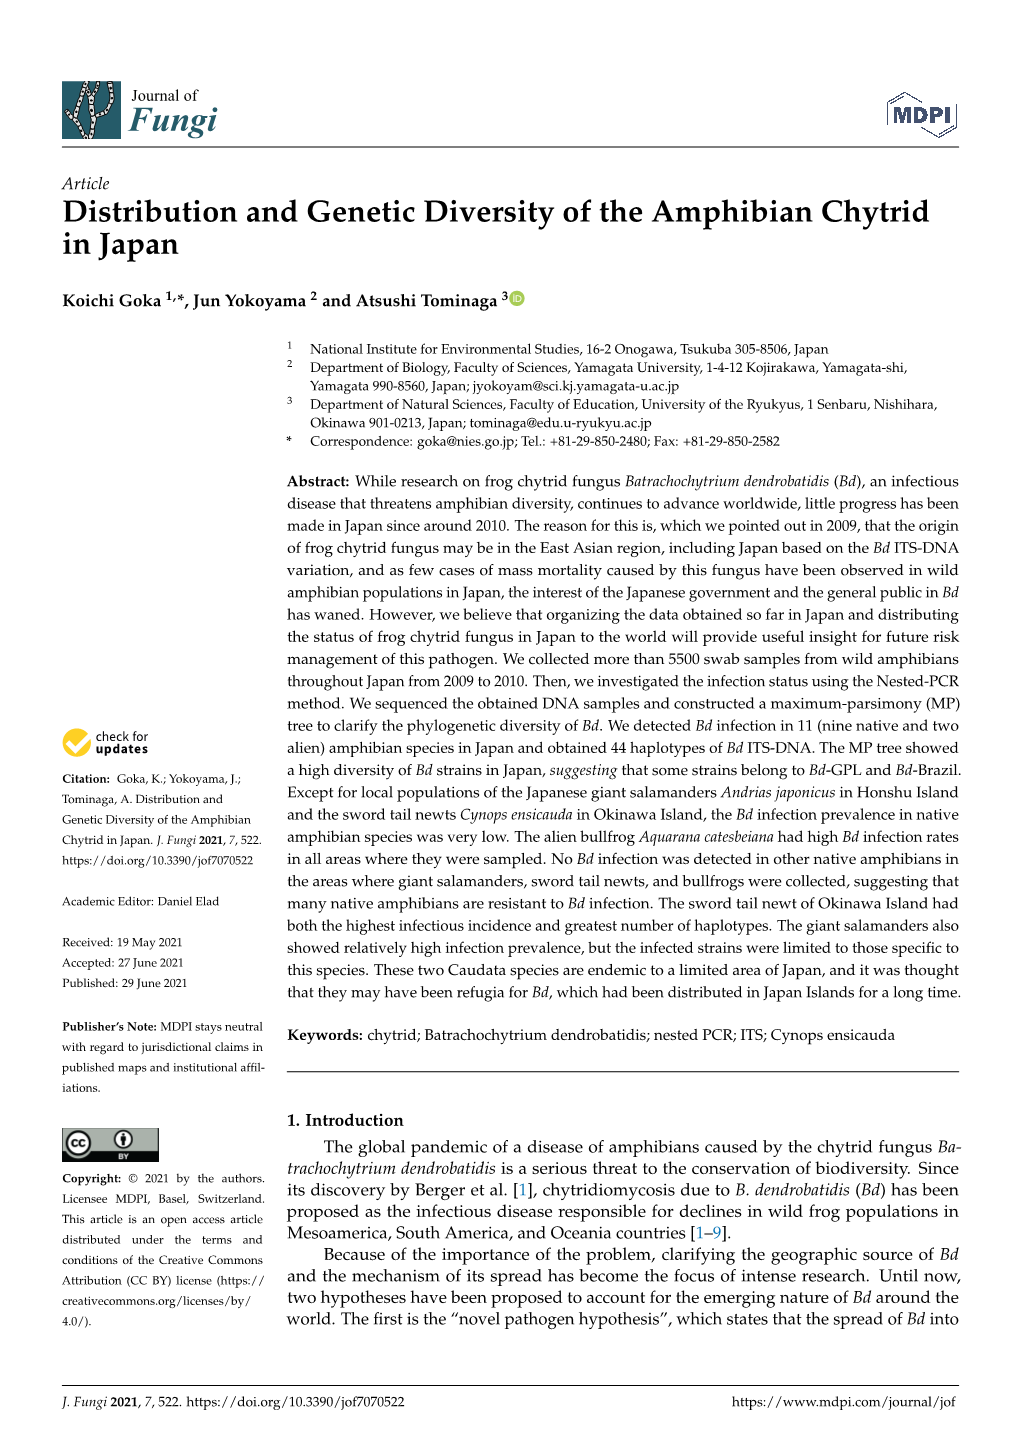 Distribution and Genetic Diversity of the Amphibian Chytrid in Japan